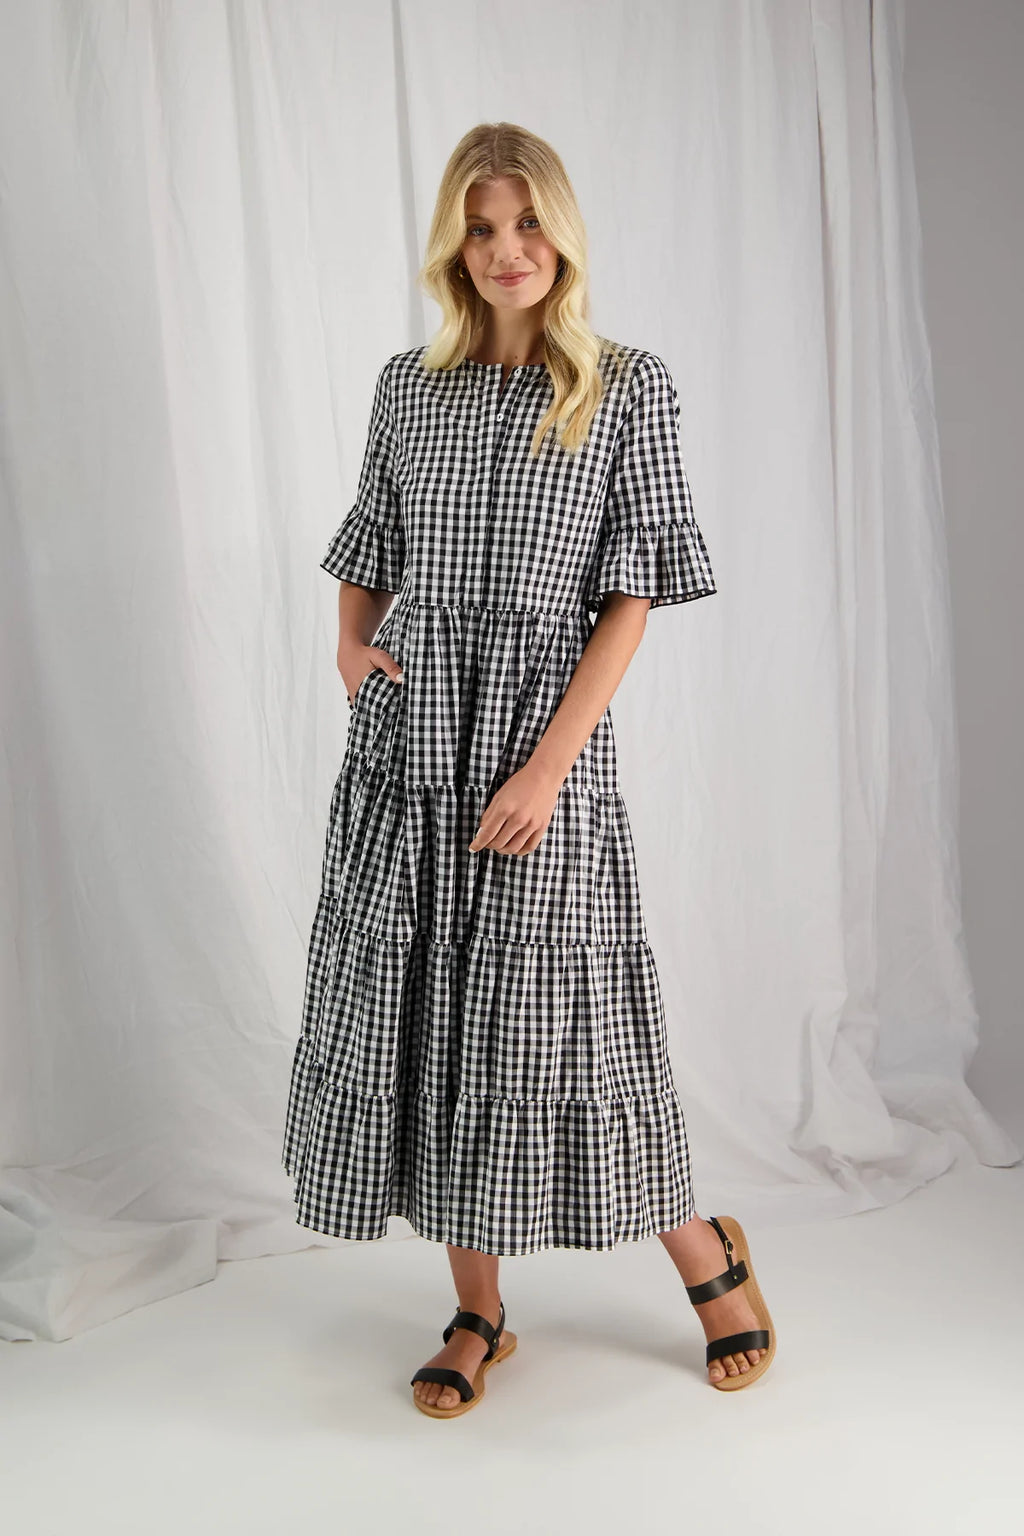 Tuesday Bridie Dress in Checkmate